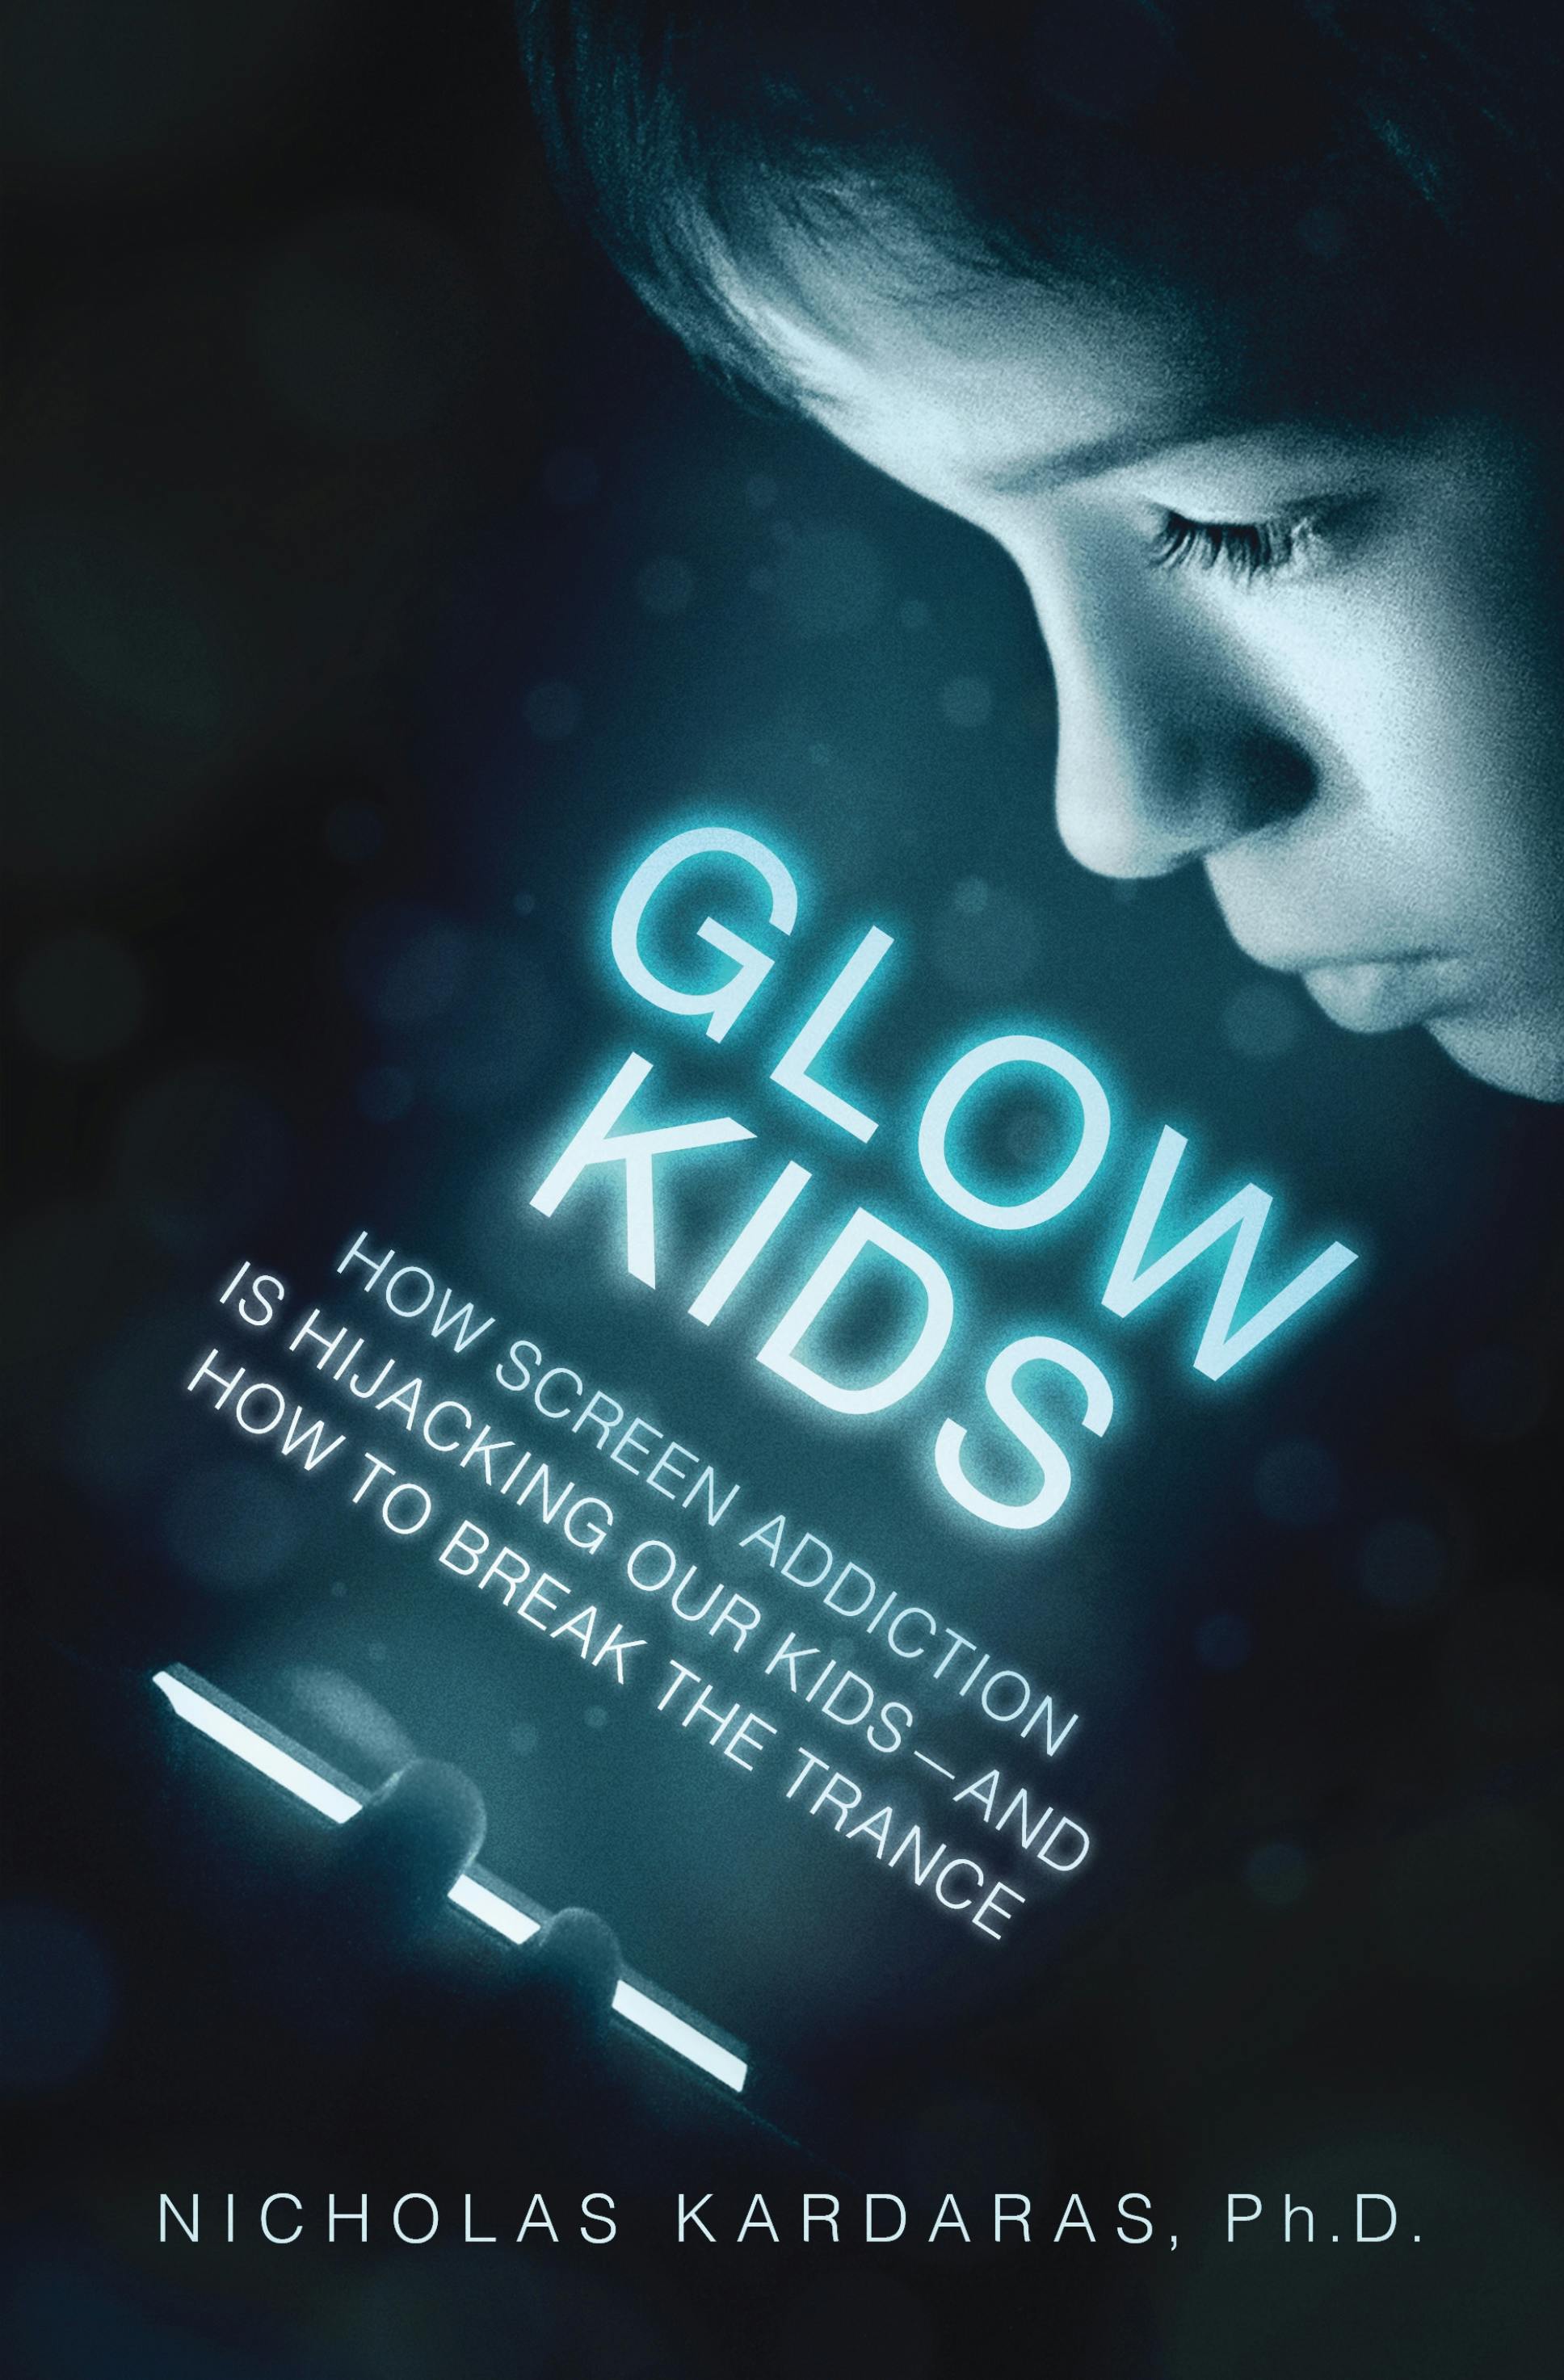 Describes for Glow Kids by authors